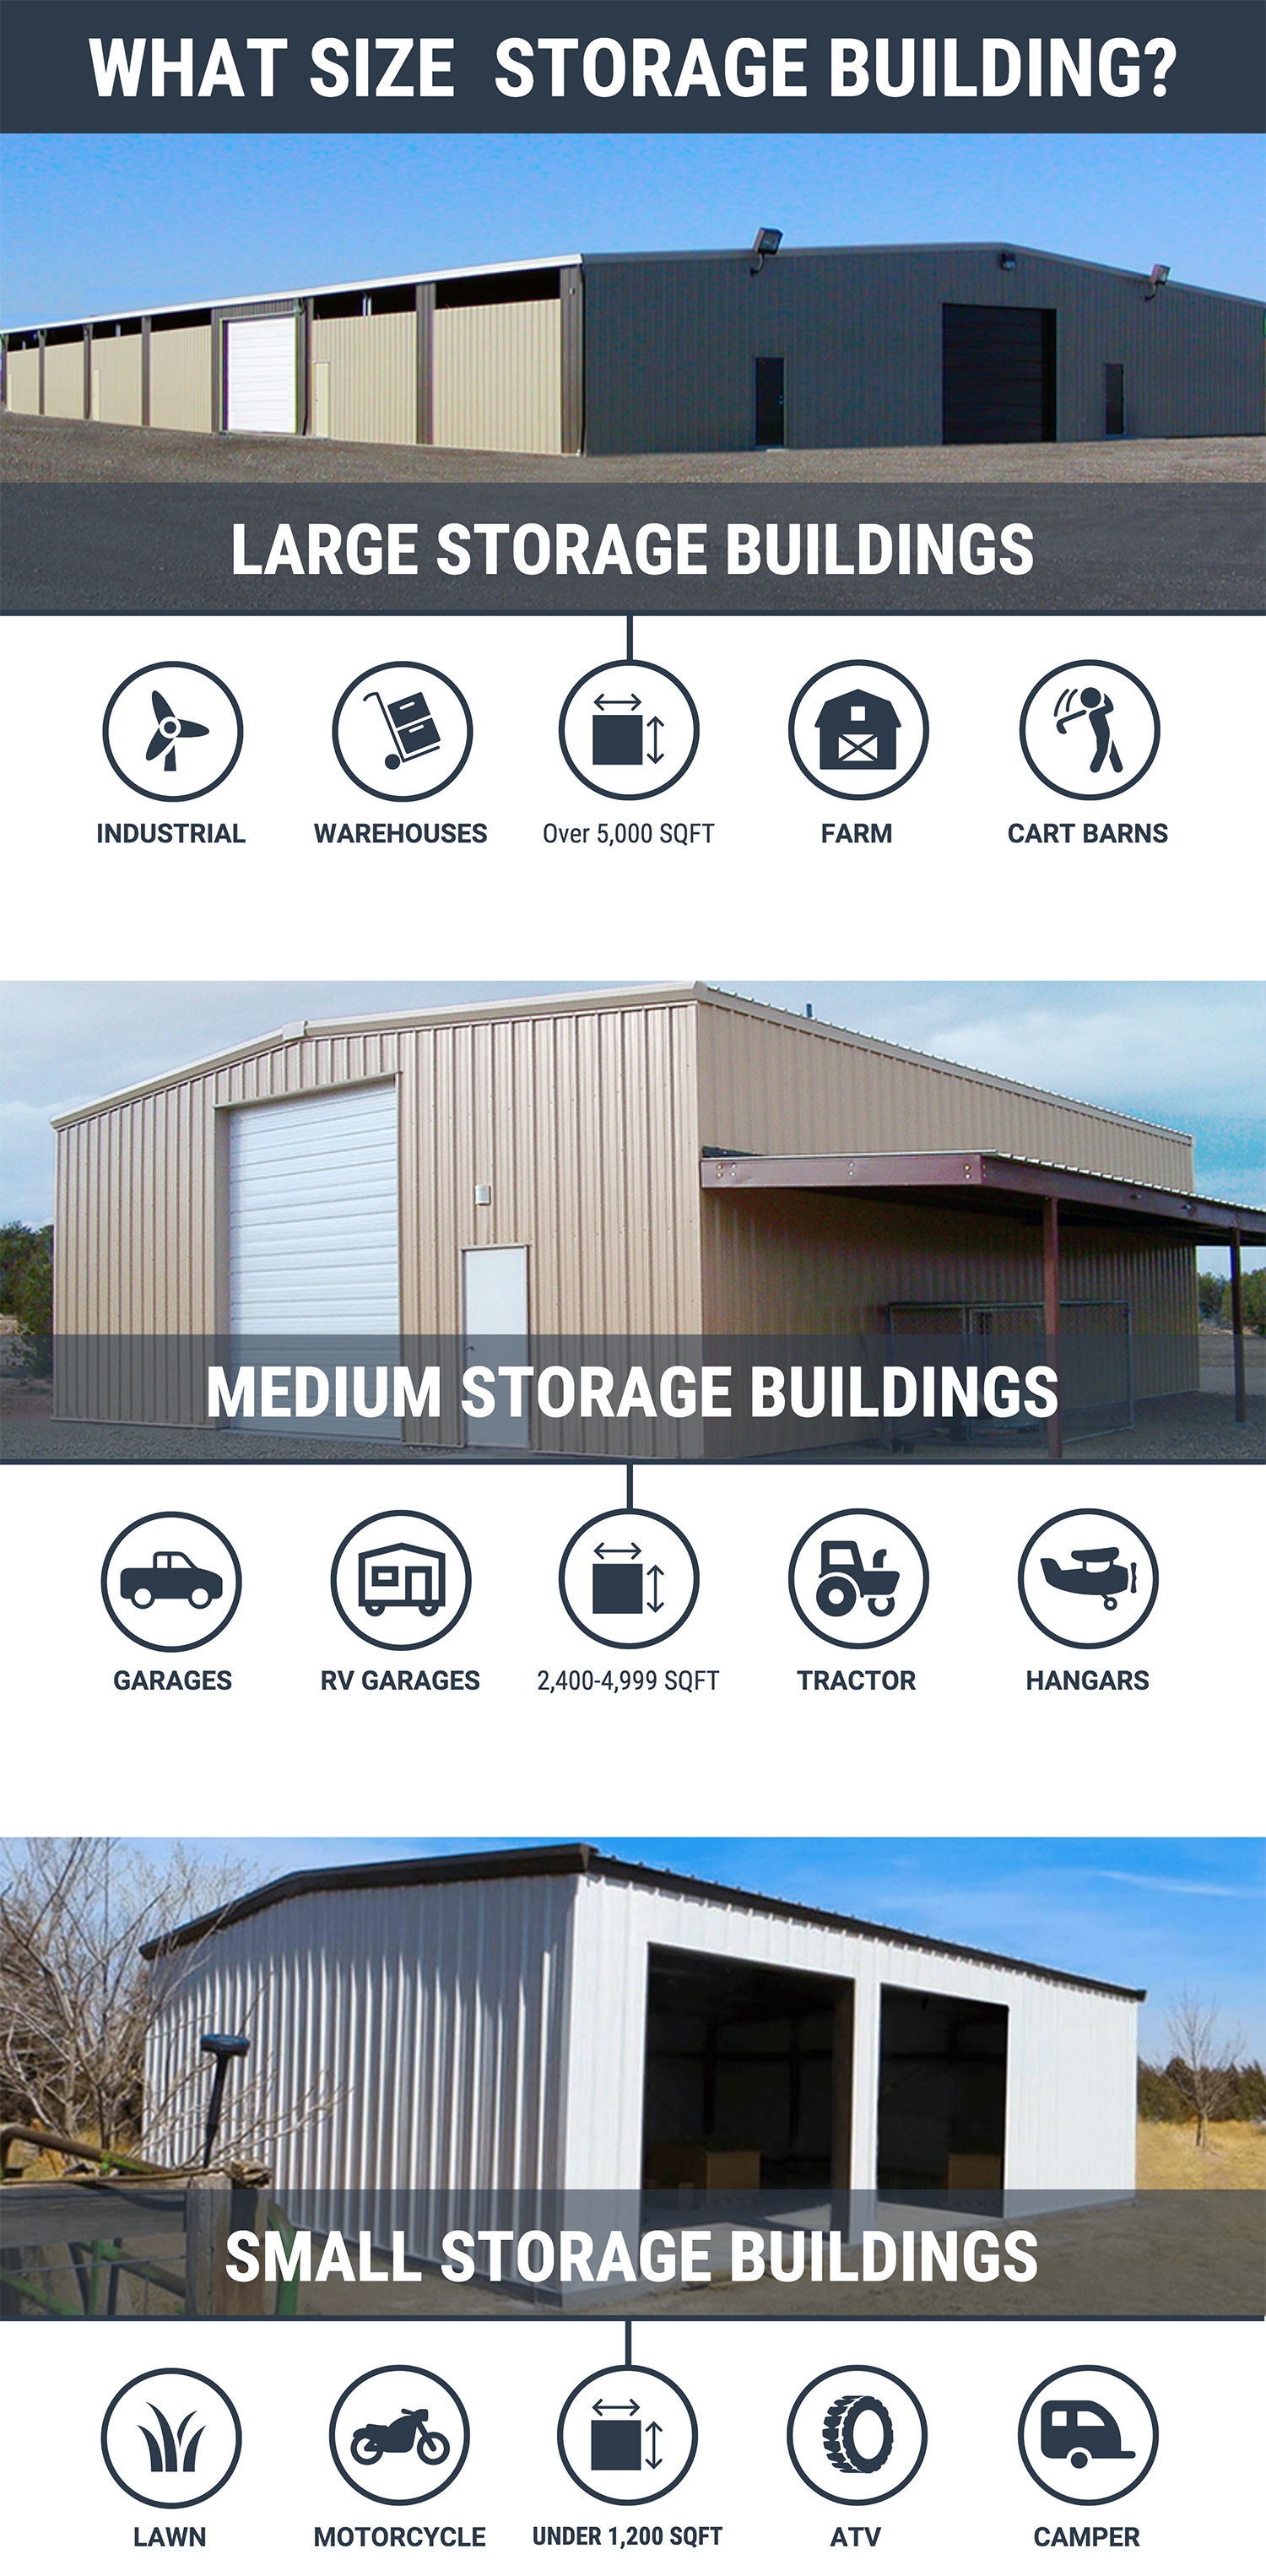 Large Medium and Small Storage Buildings